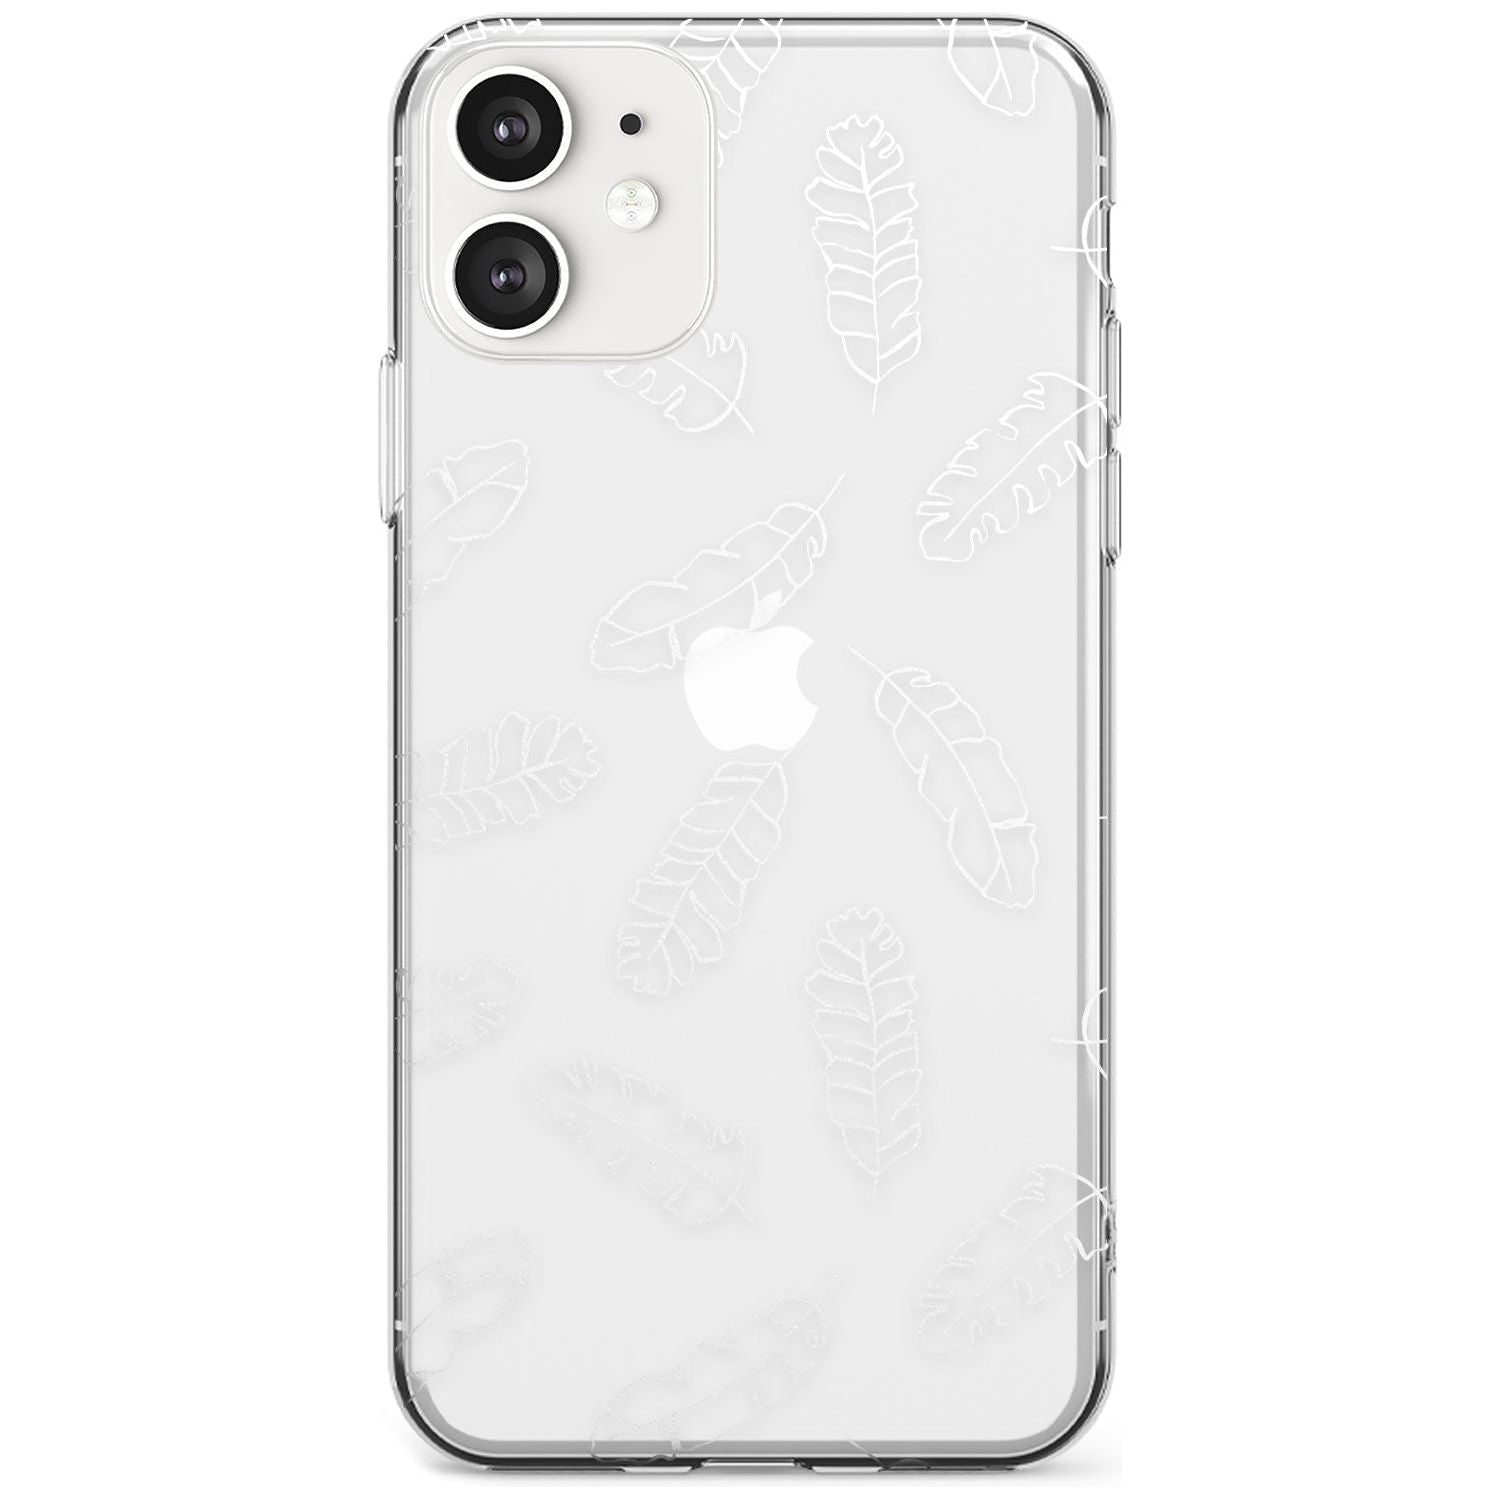 Clear Botanical Designs: Palm Leaves Black Impact Phone Case for iPhone 11